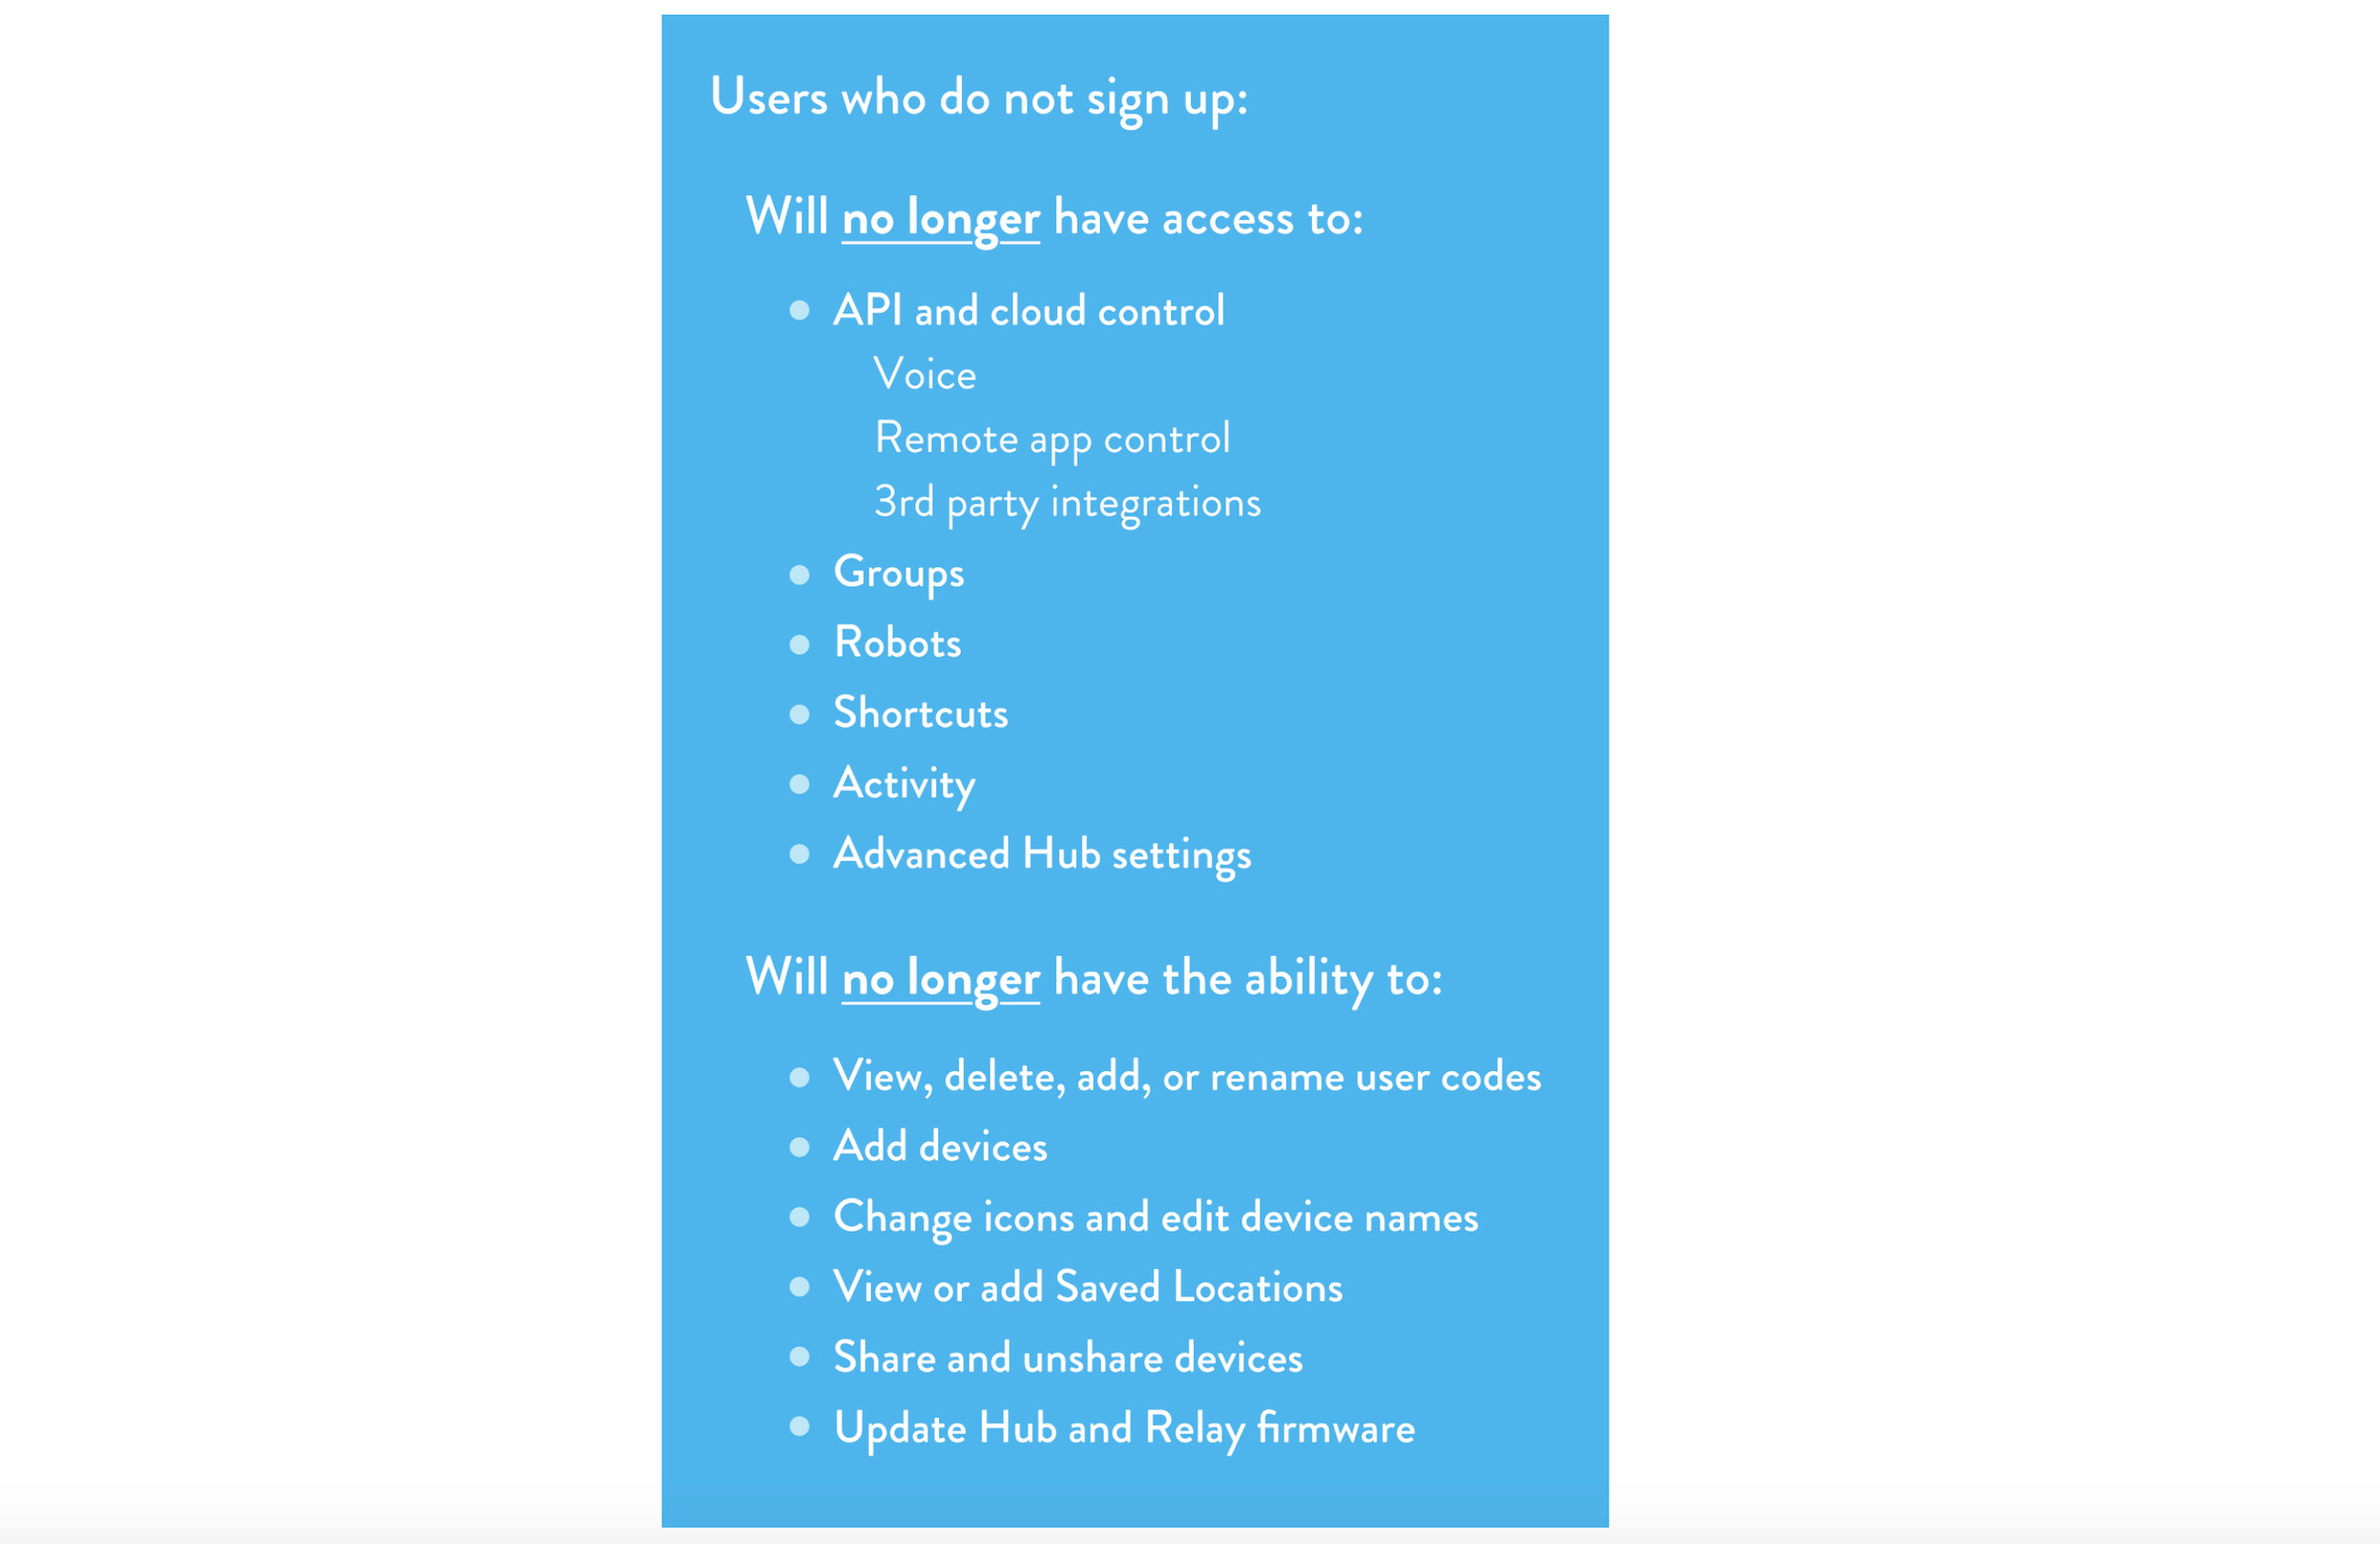 The full list of features that will require a Wink subscription to access.